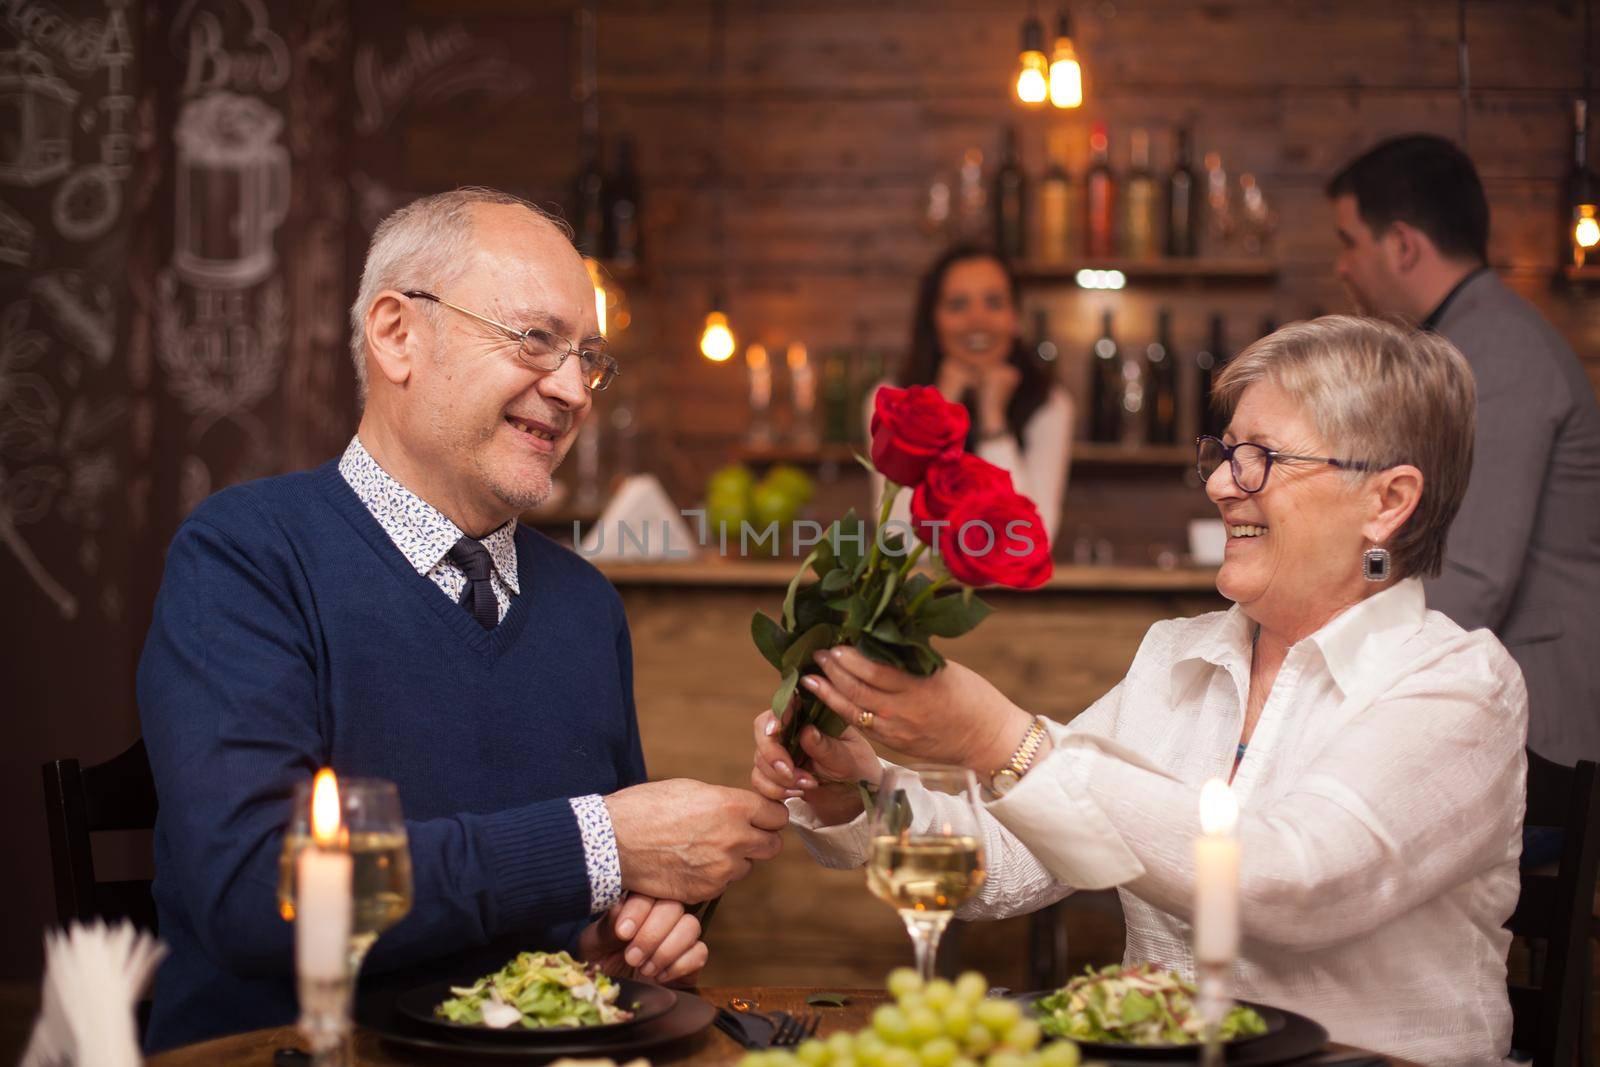 Cheerful senior couple happy about their date by DCStudio